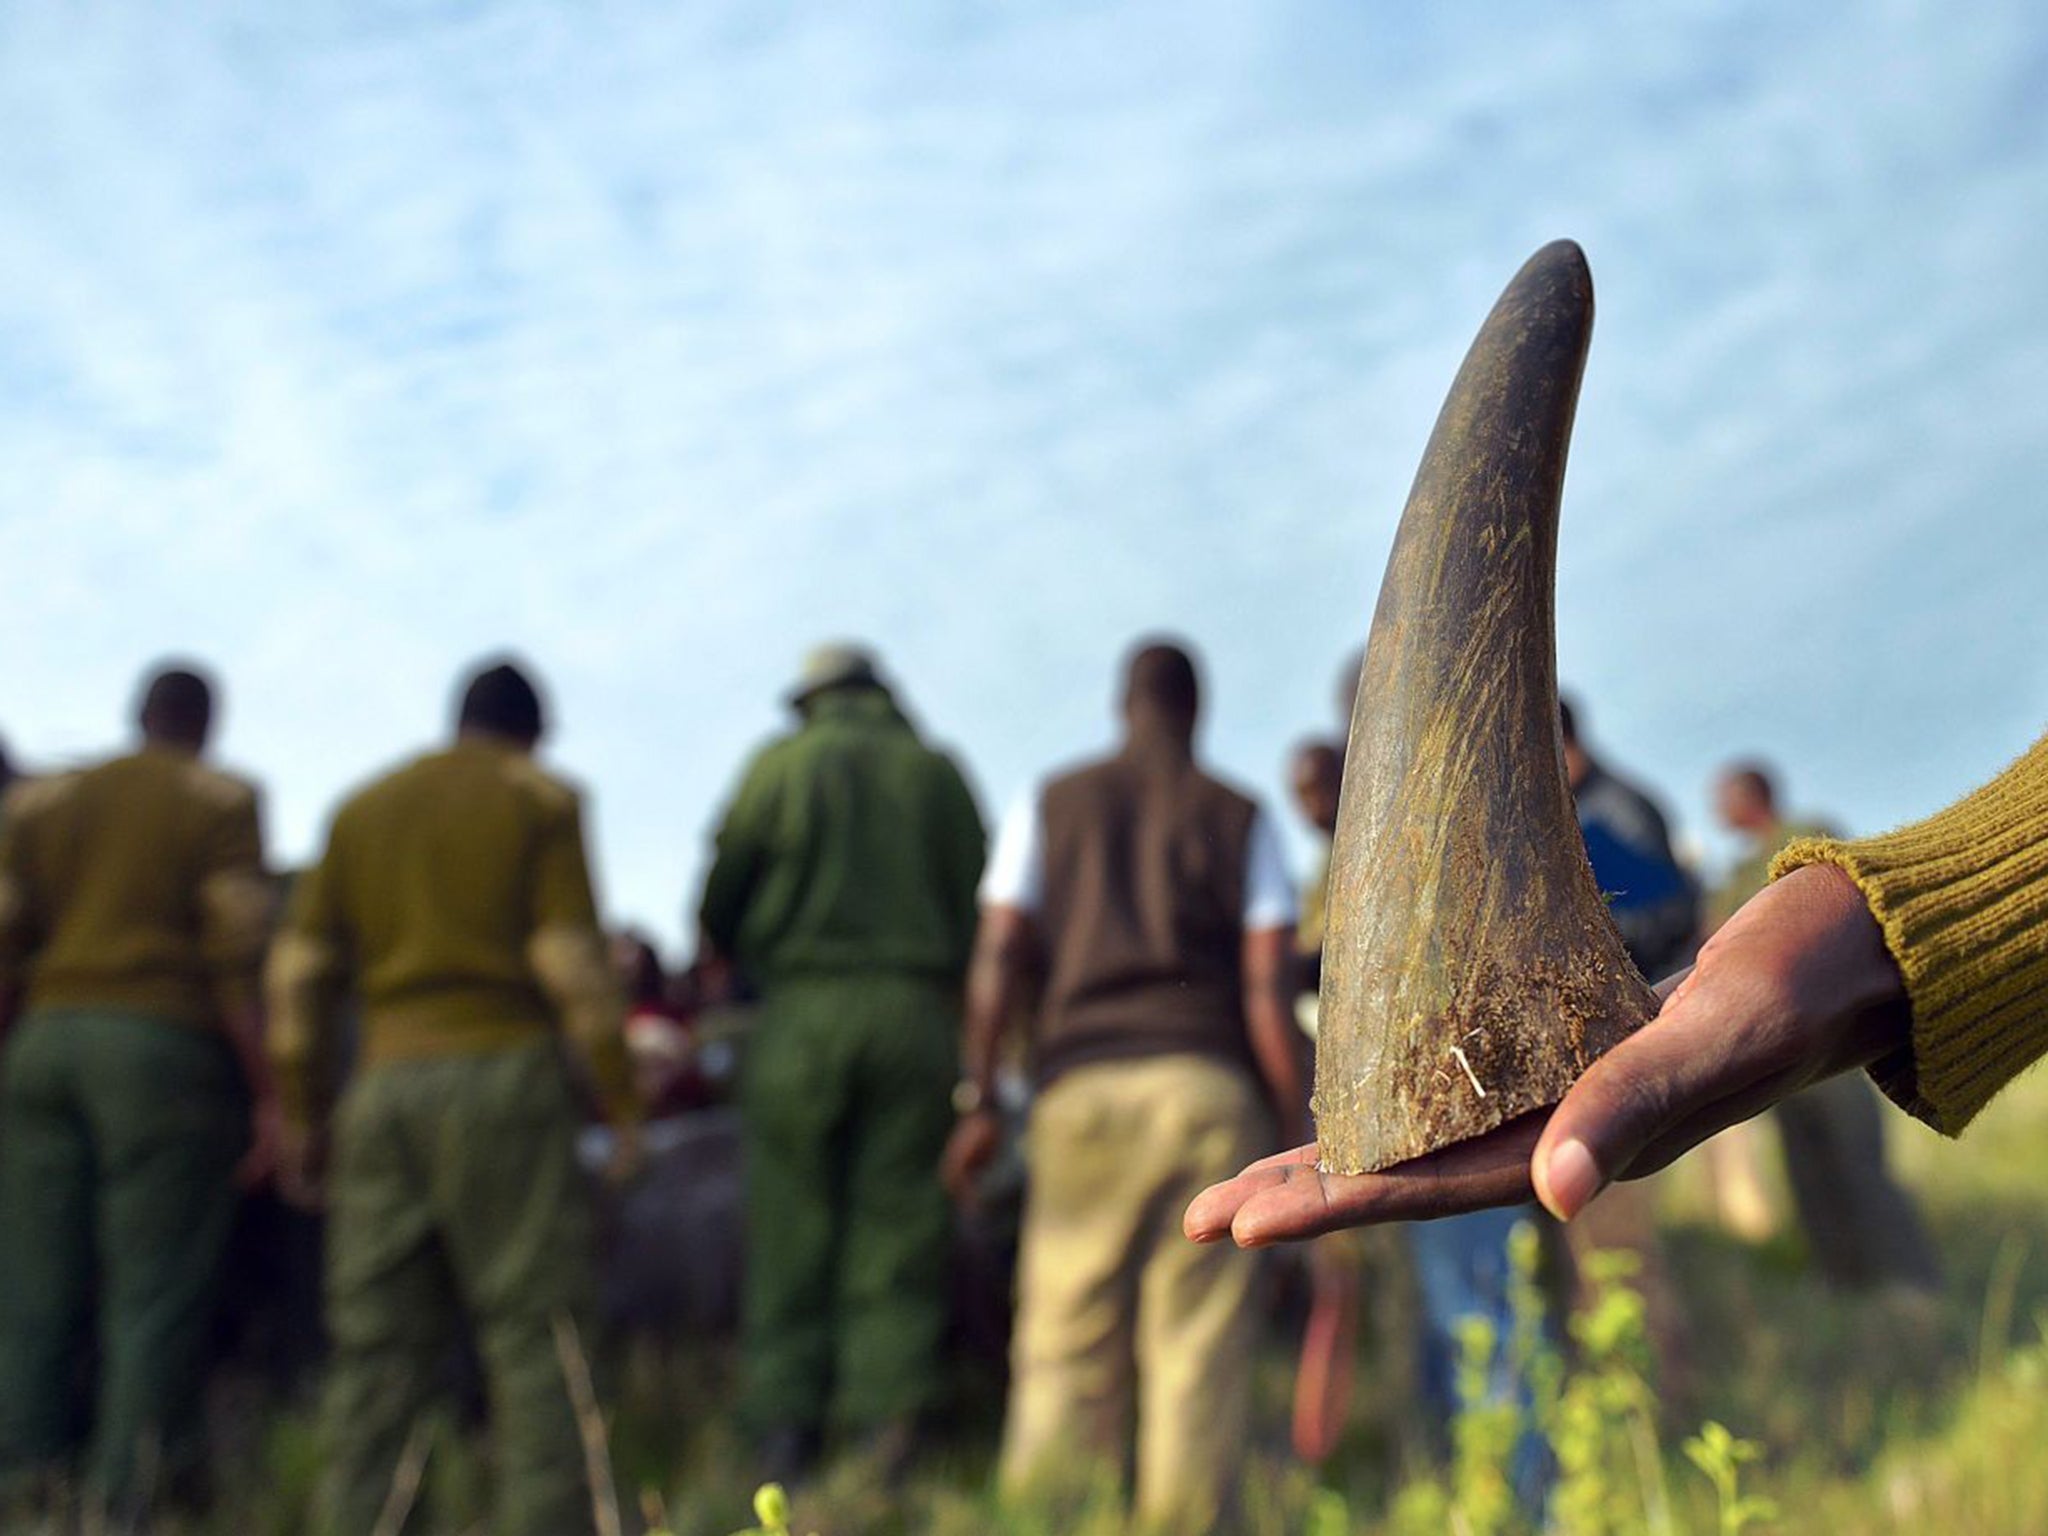 At £32,000 a kilogram, rhino horn is worth more by weight than gold, and is not far from the street value of cocaine